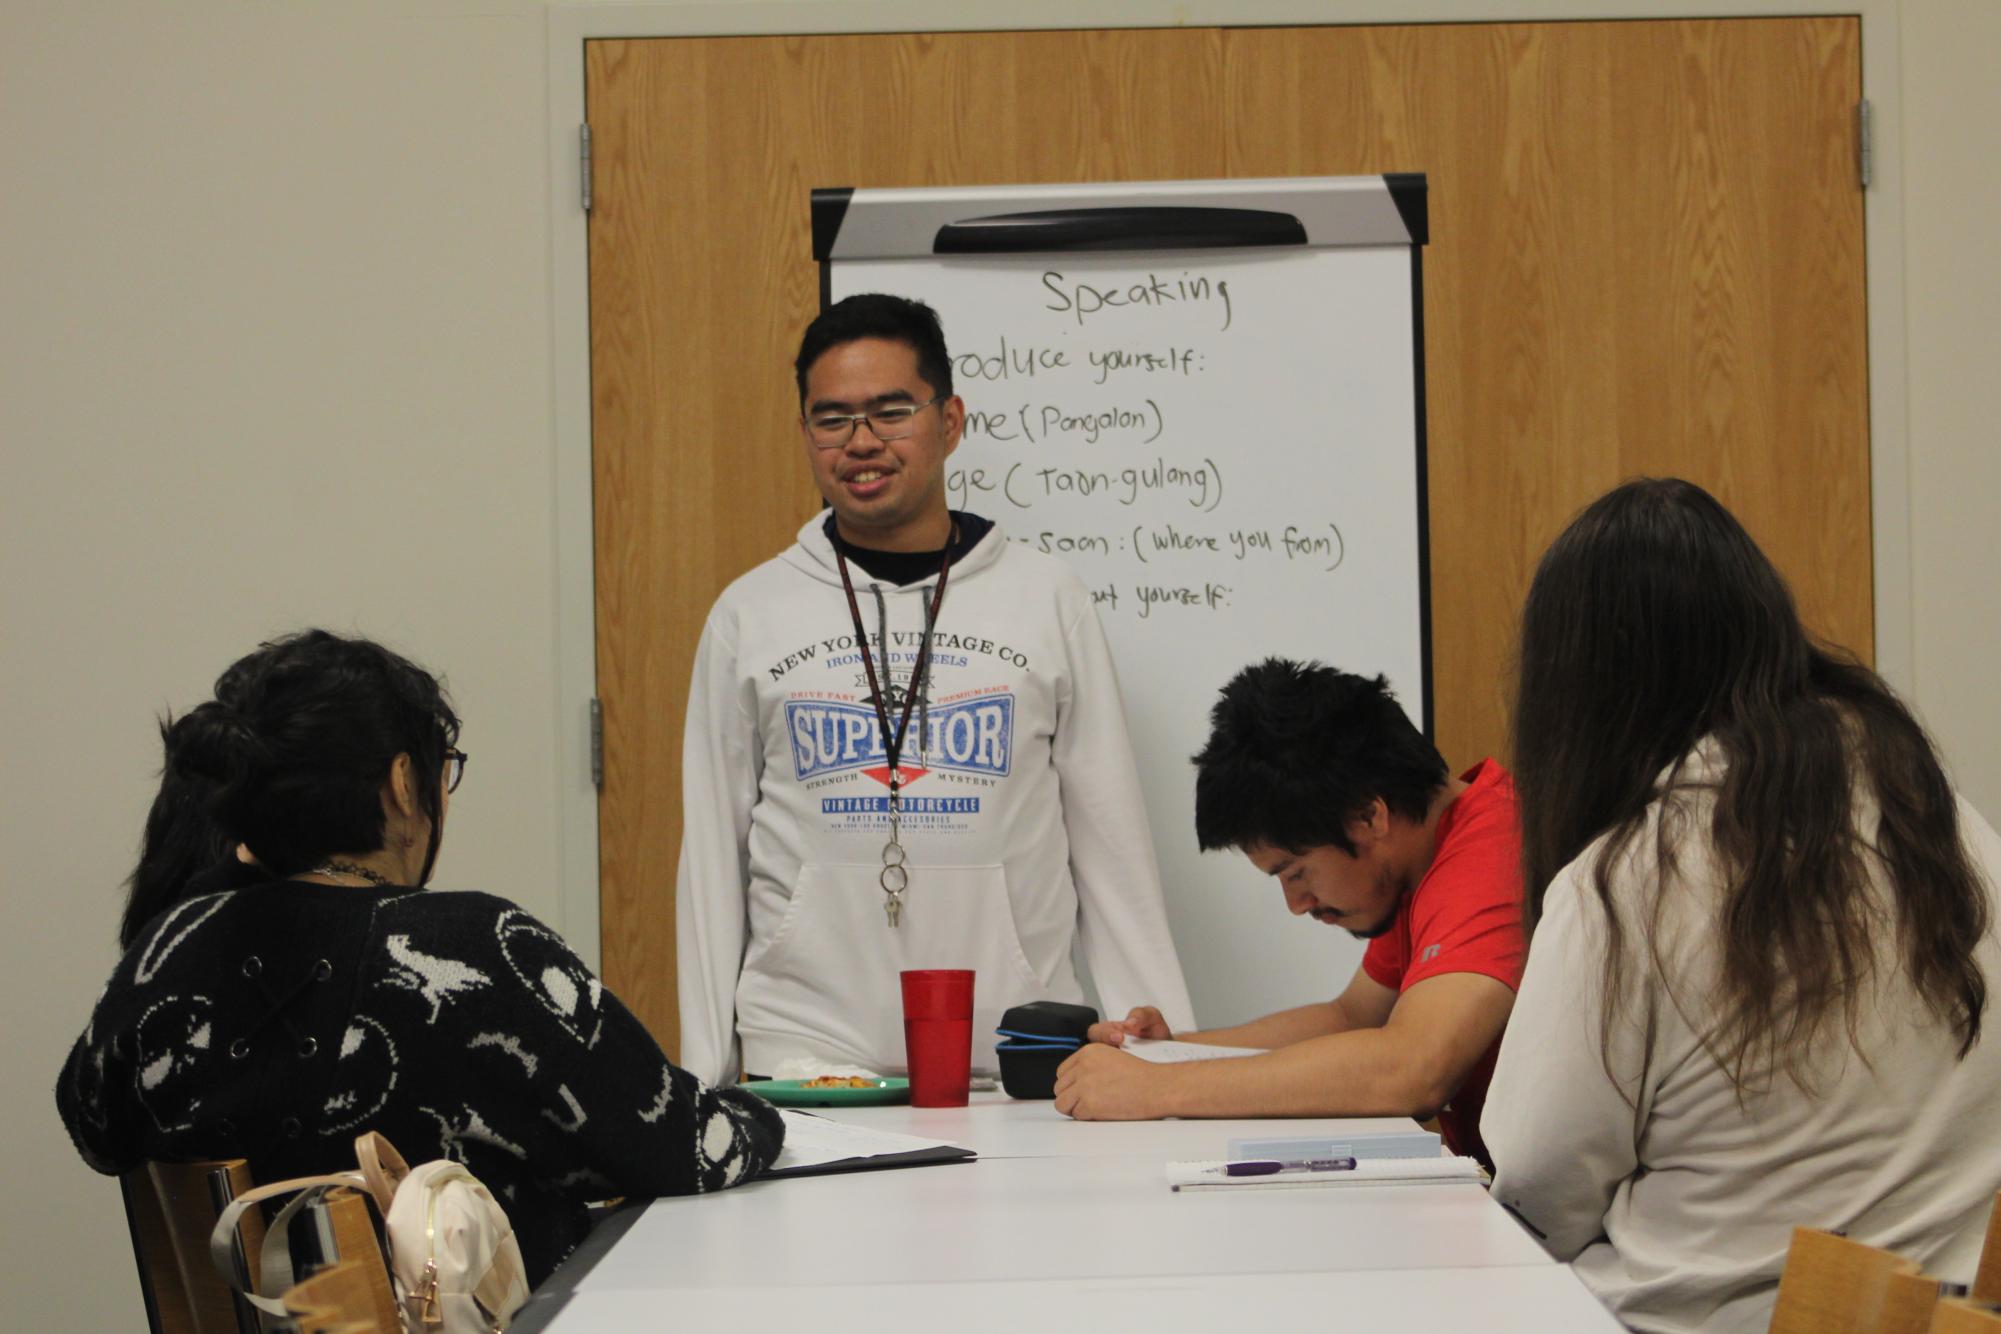 Isiah Camarao, a sophomore biological sciences major, teaches a group at the Foreign Language Residence Program to speak Tagalog. The Foreign Language Residence Program helps to teach language through conversation. (Michael Mollsen | Northern Star)